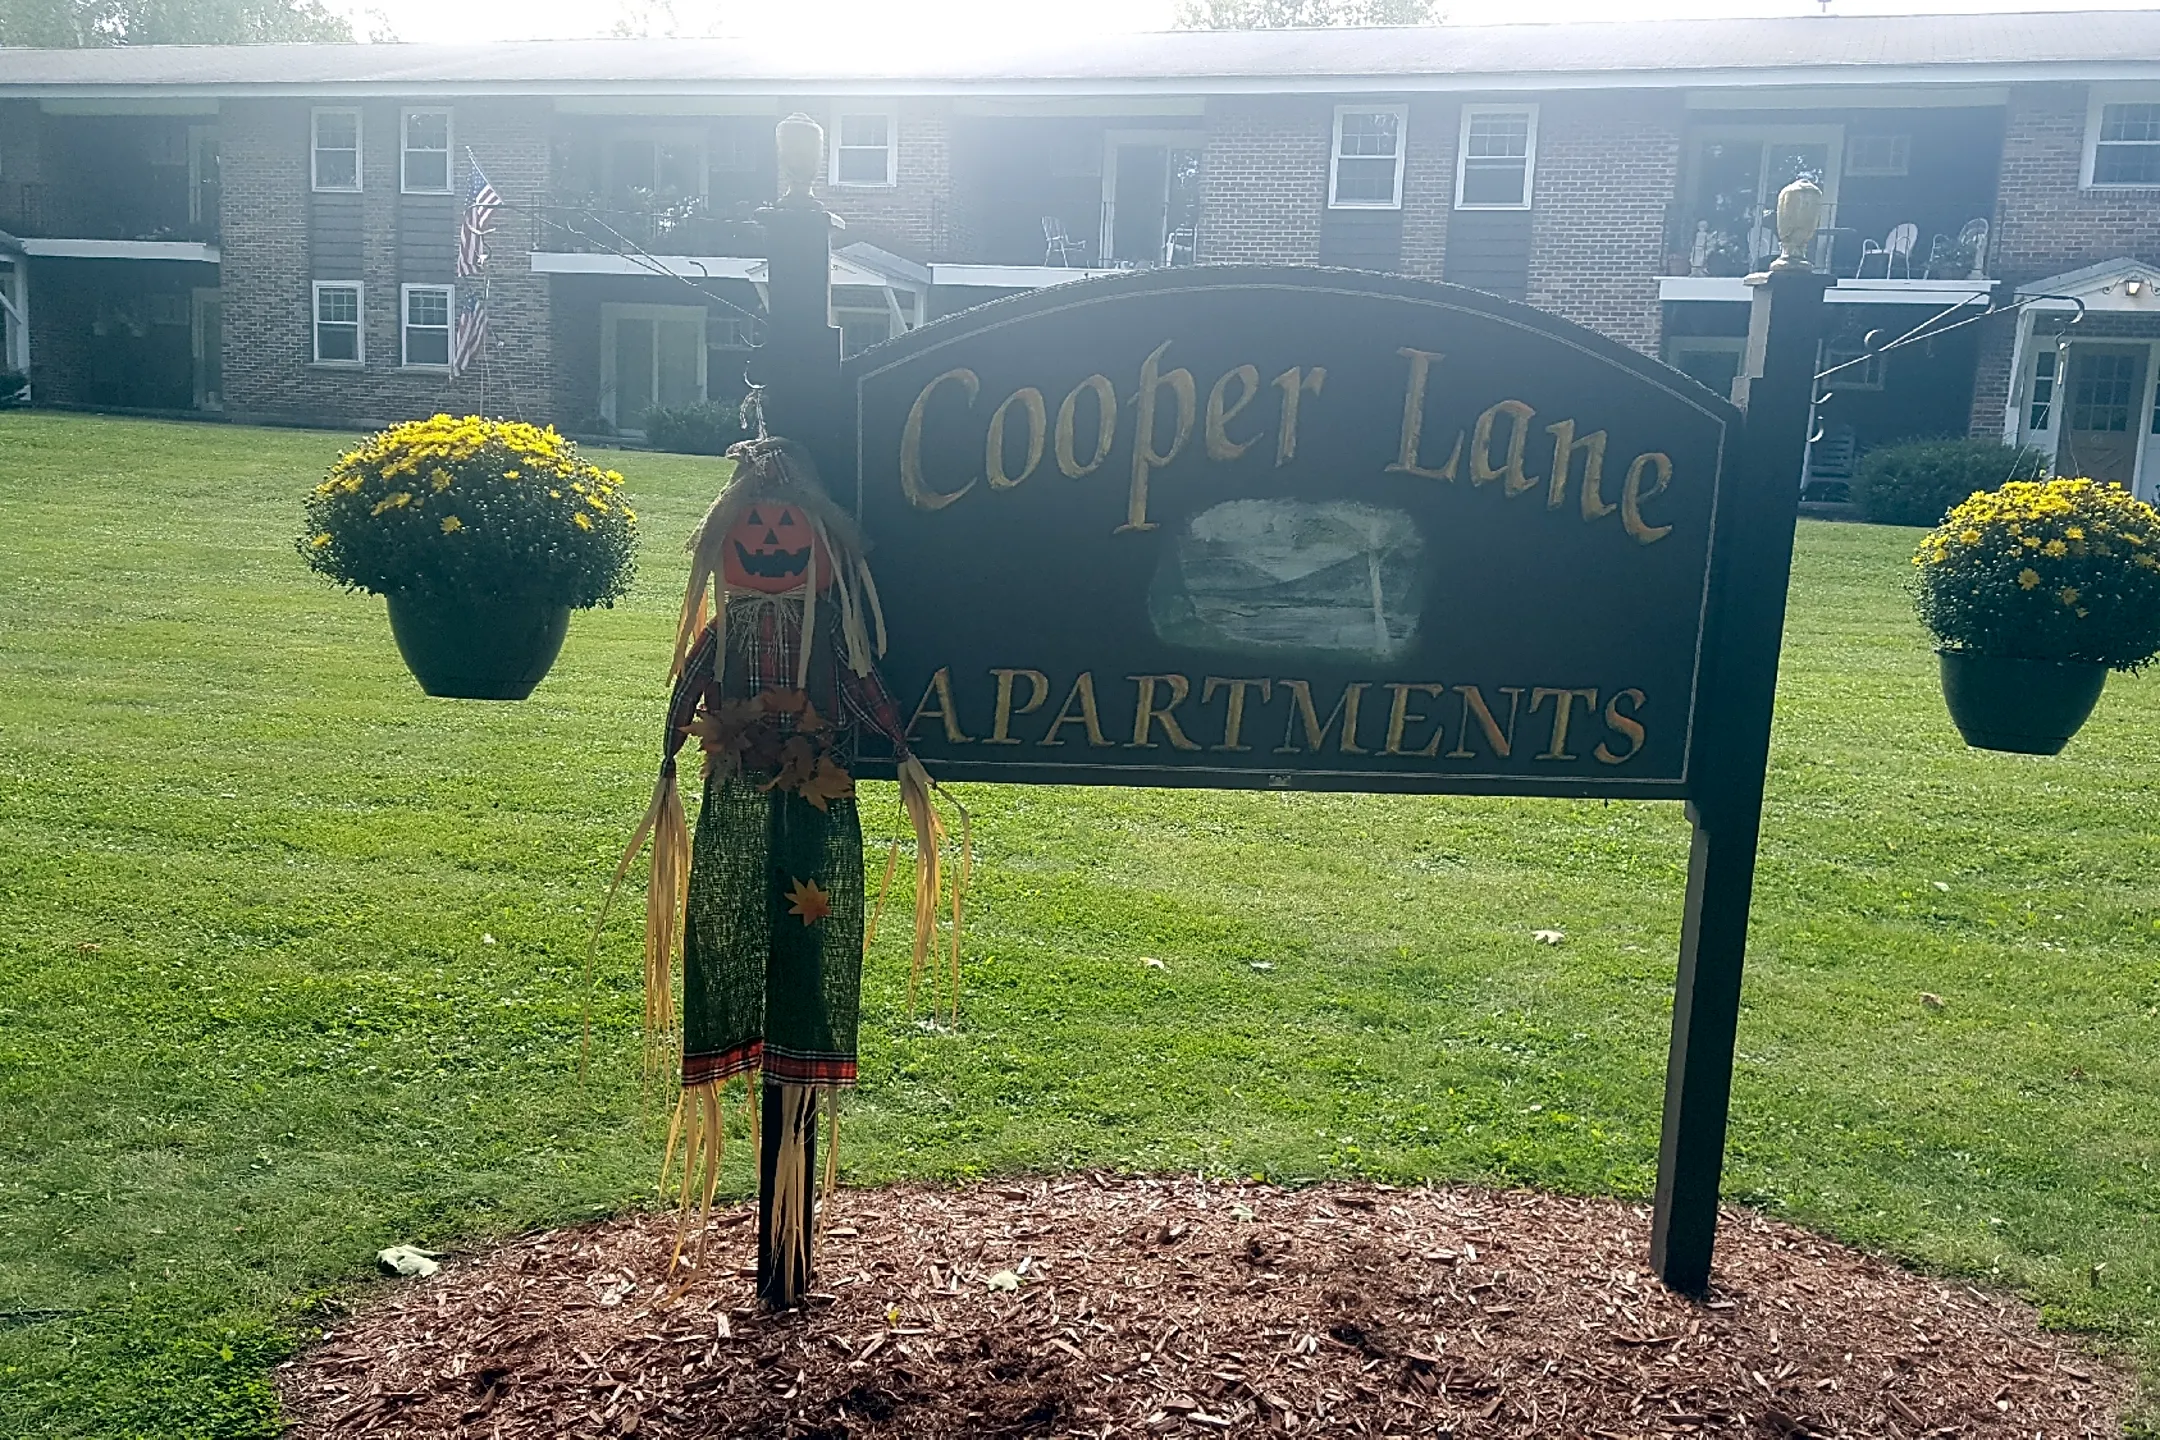 Pool - Cooper Lane Apartments - Cooperstown, NY